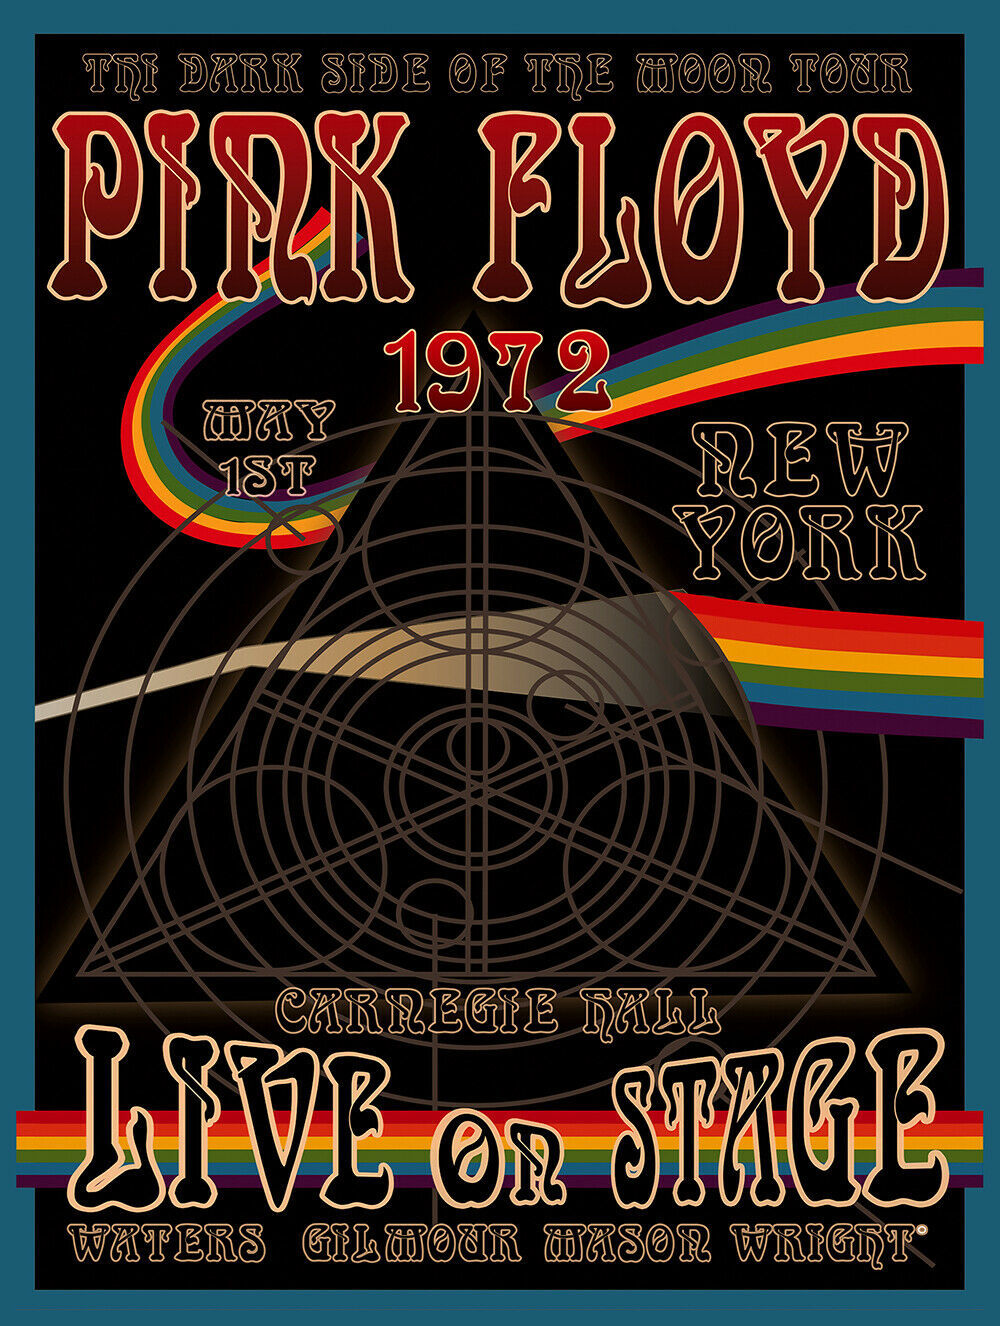 1972 Pink Floyd New York concert poster reproduction metal sign ...